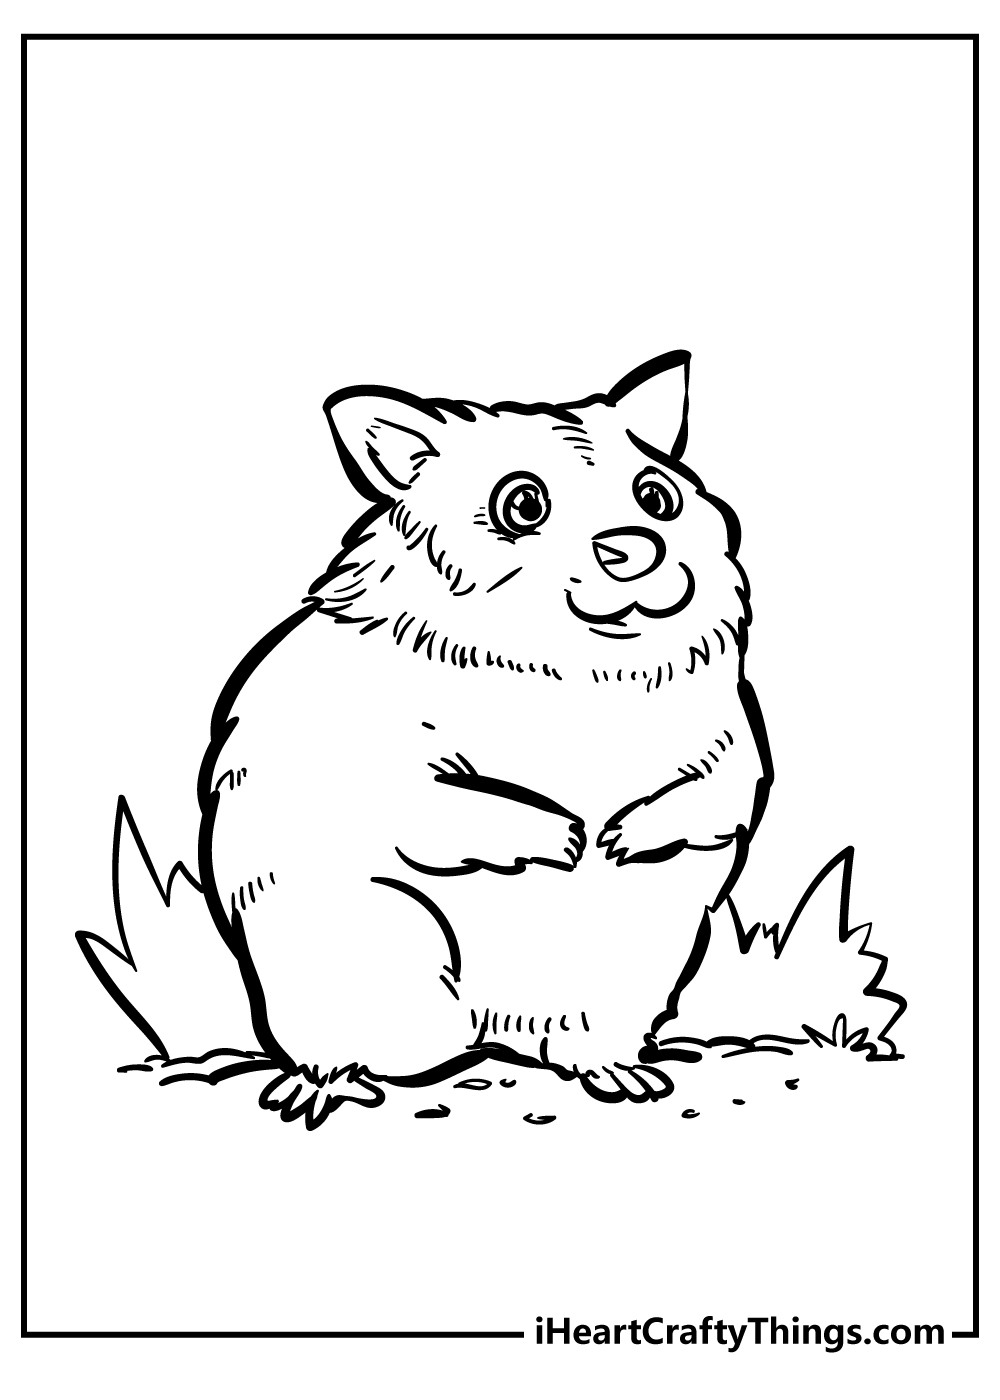 Hamster Coloring Pages for adults free printable